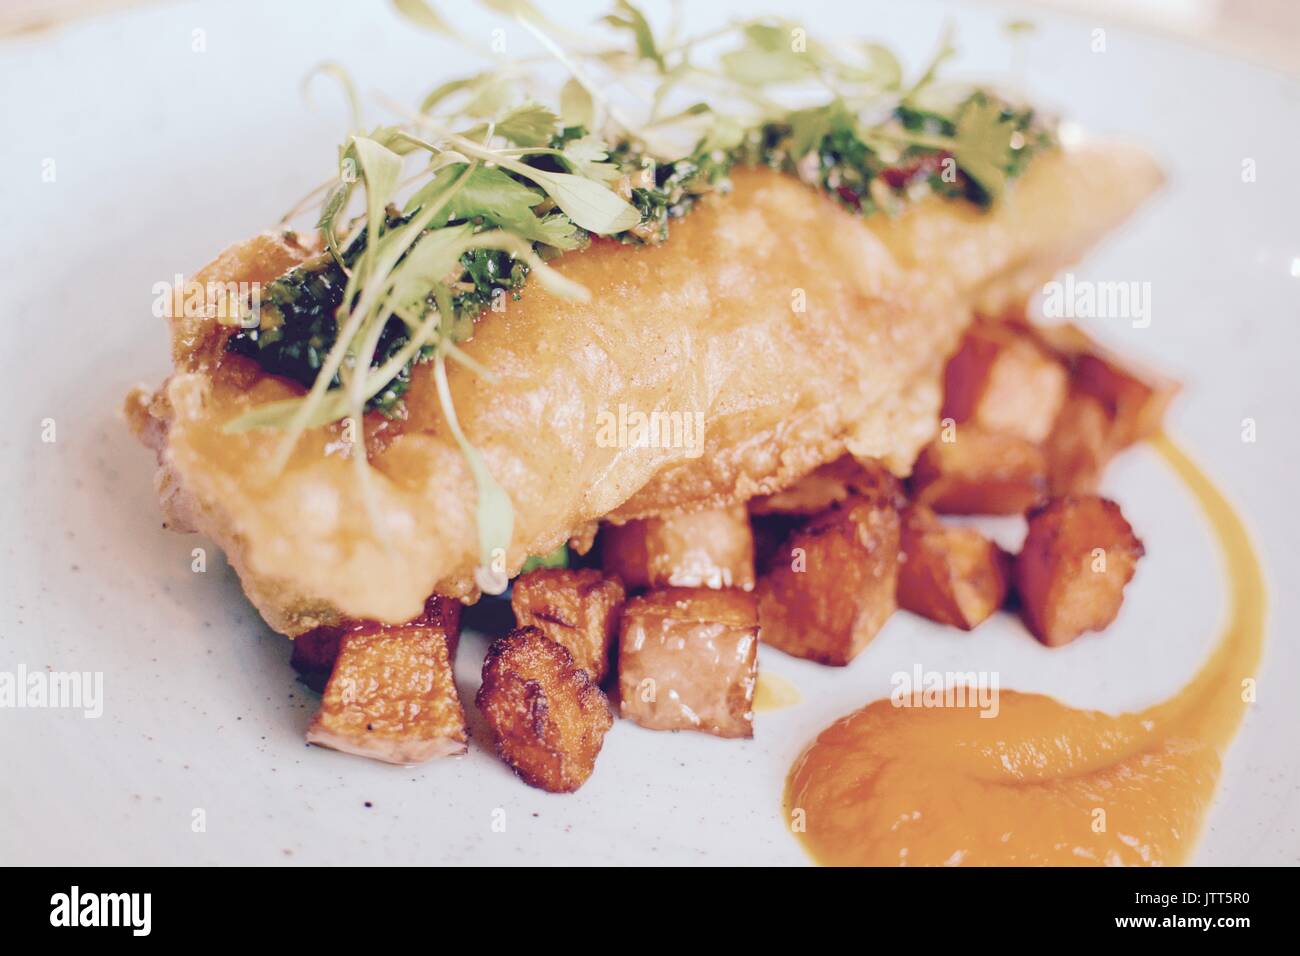 Gourmet battered fish with fried sweet potatoes Stock Photo